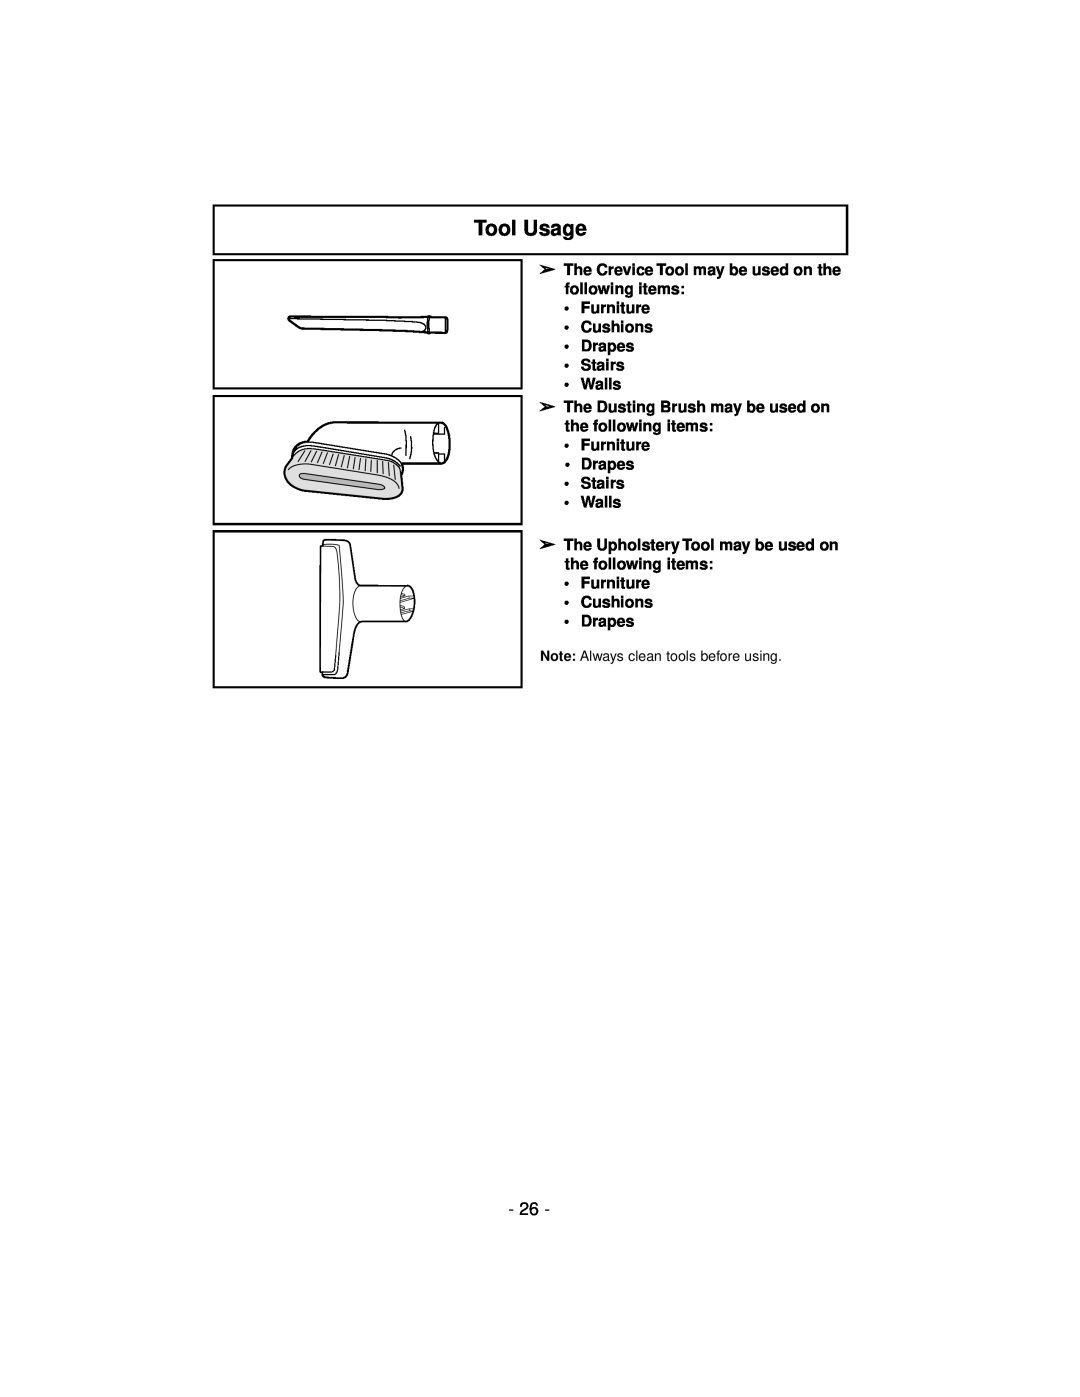 Panasonic MC-V7319 Tool Usage, The Crevice Tool may be used on the following items Furniture, Cushions Drapes Stairs Walls 